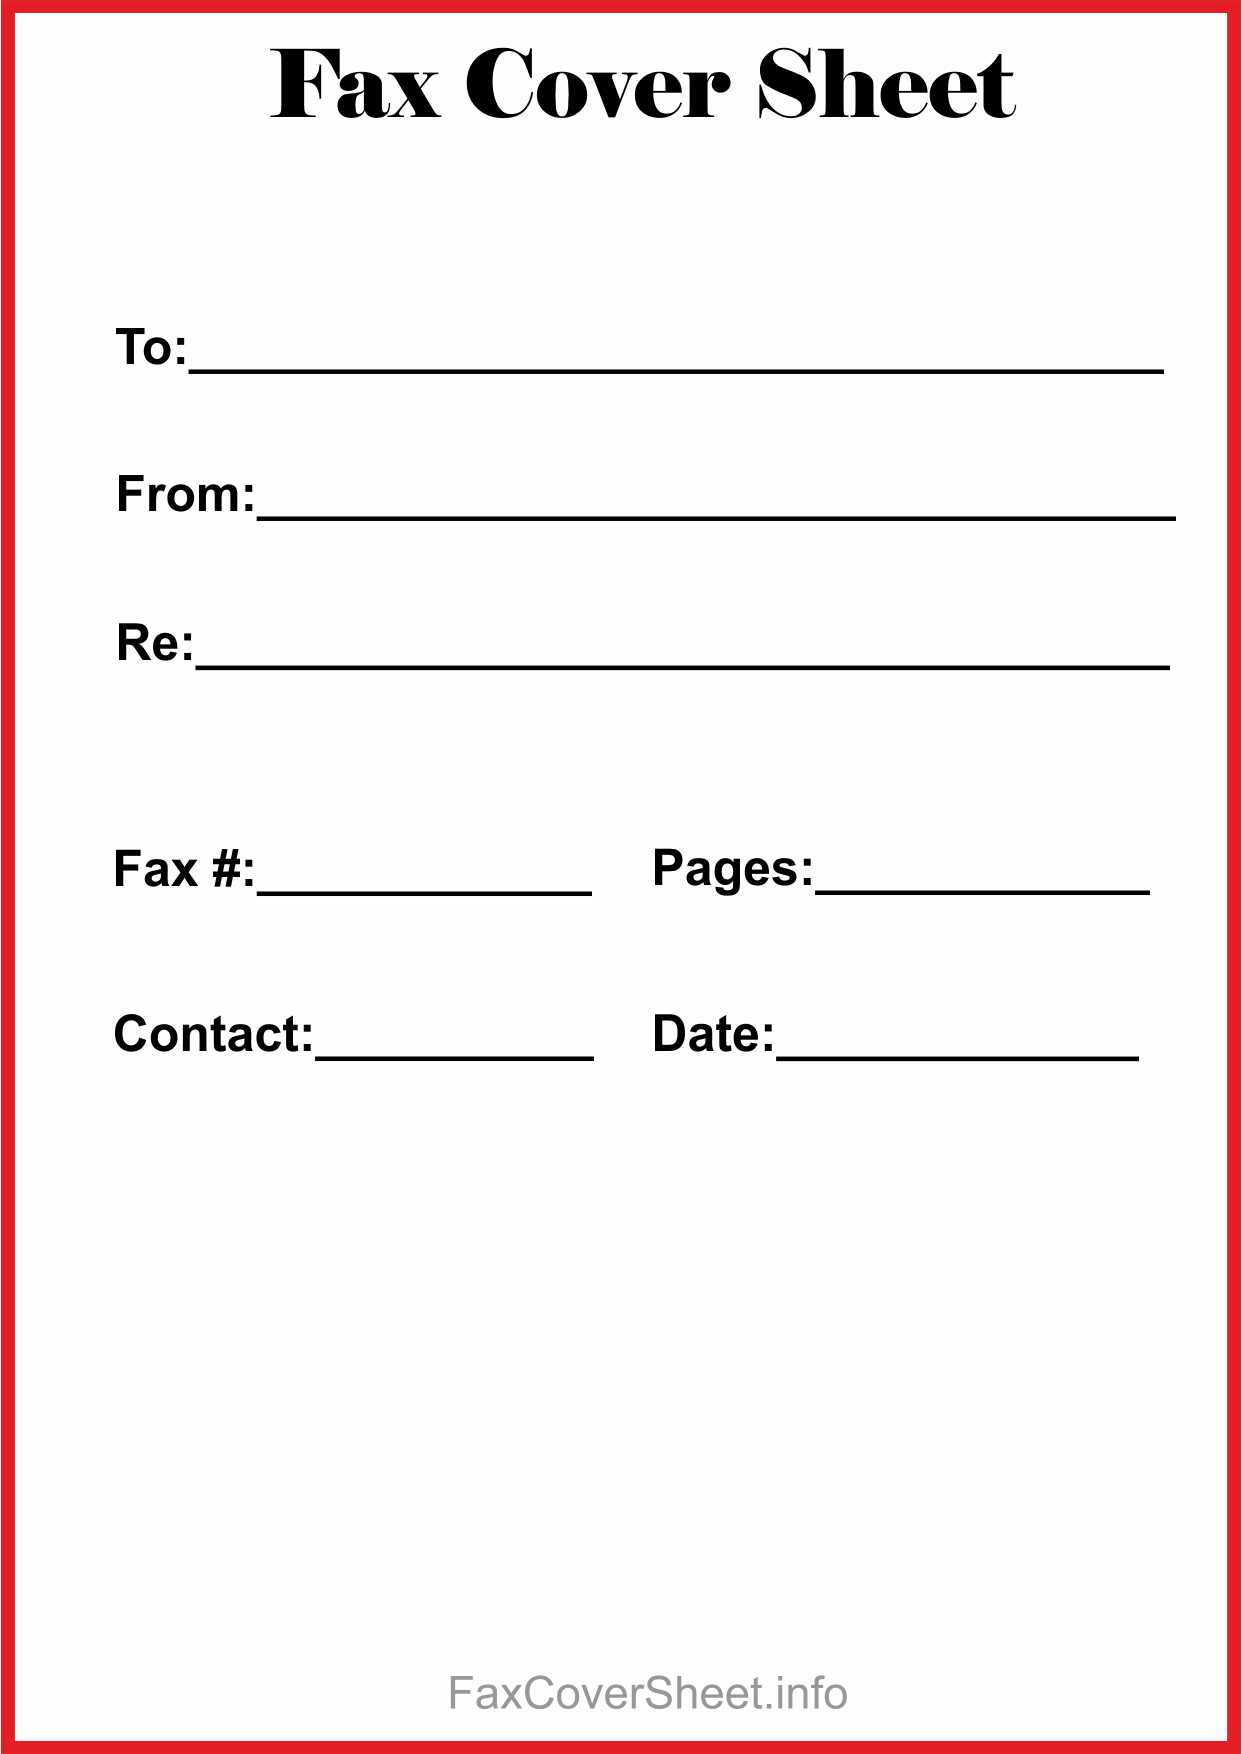 How To Find Blank Fax Cover Sheet Within Microsoft Word For Fax Cover Sheet Template Word 2010